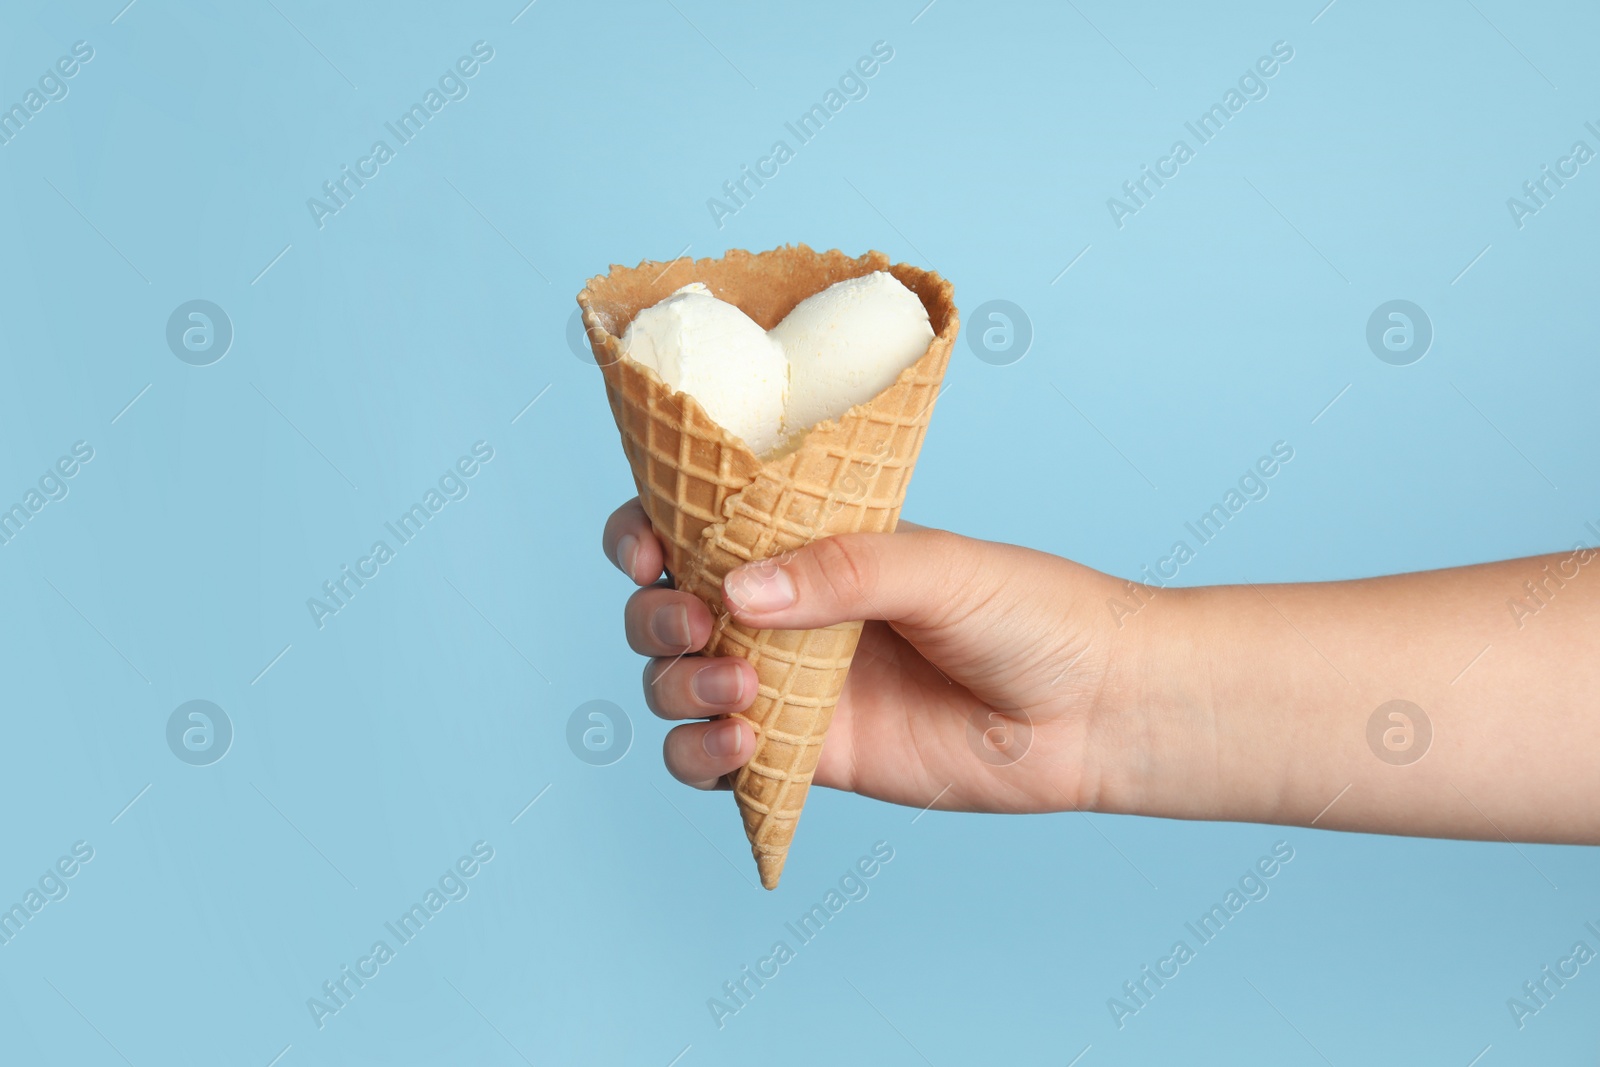 Photo of Woman holding delicious ice cream in wafer cone on blue background, closeup